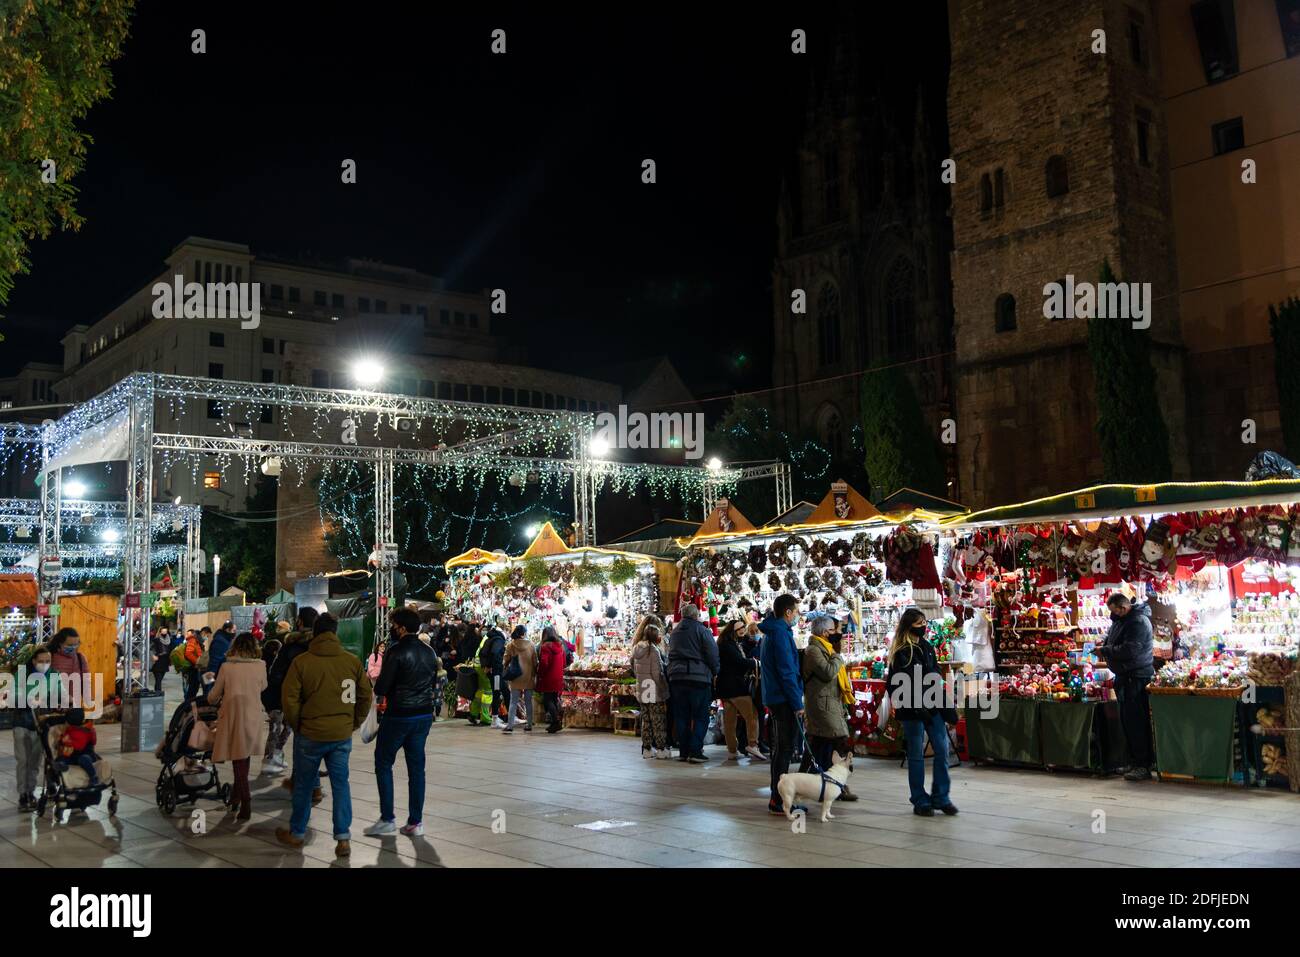 barcelona, spain - 3 december 2020: people attend christmas market in barcelona cathedral known as 'fira de santa lucia' with covid 19 restrictions on Stock Photo